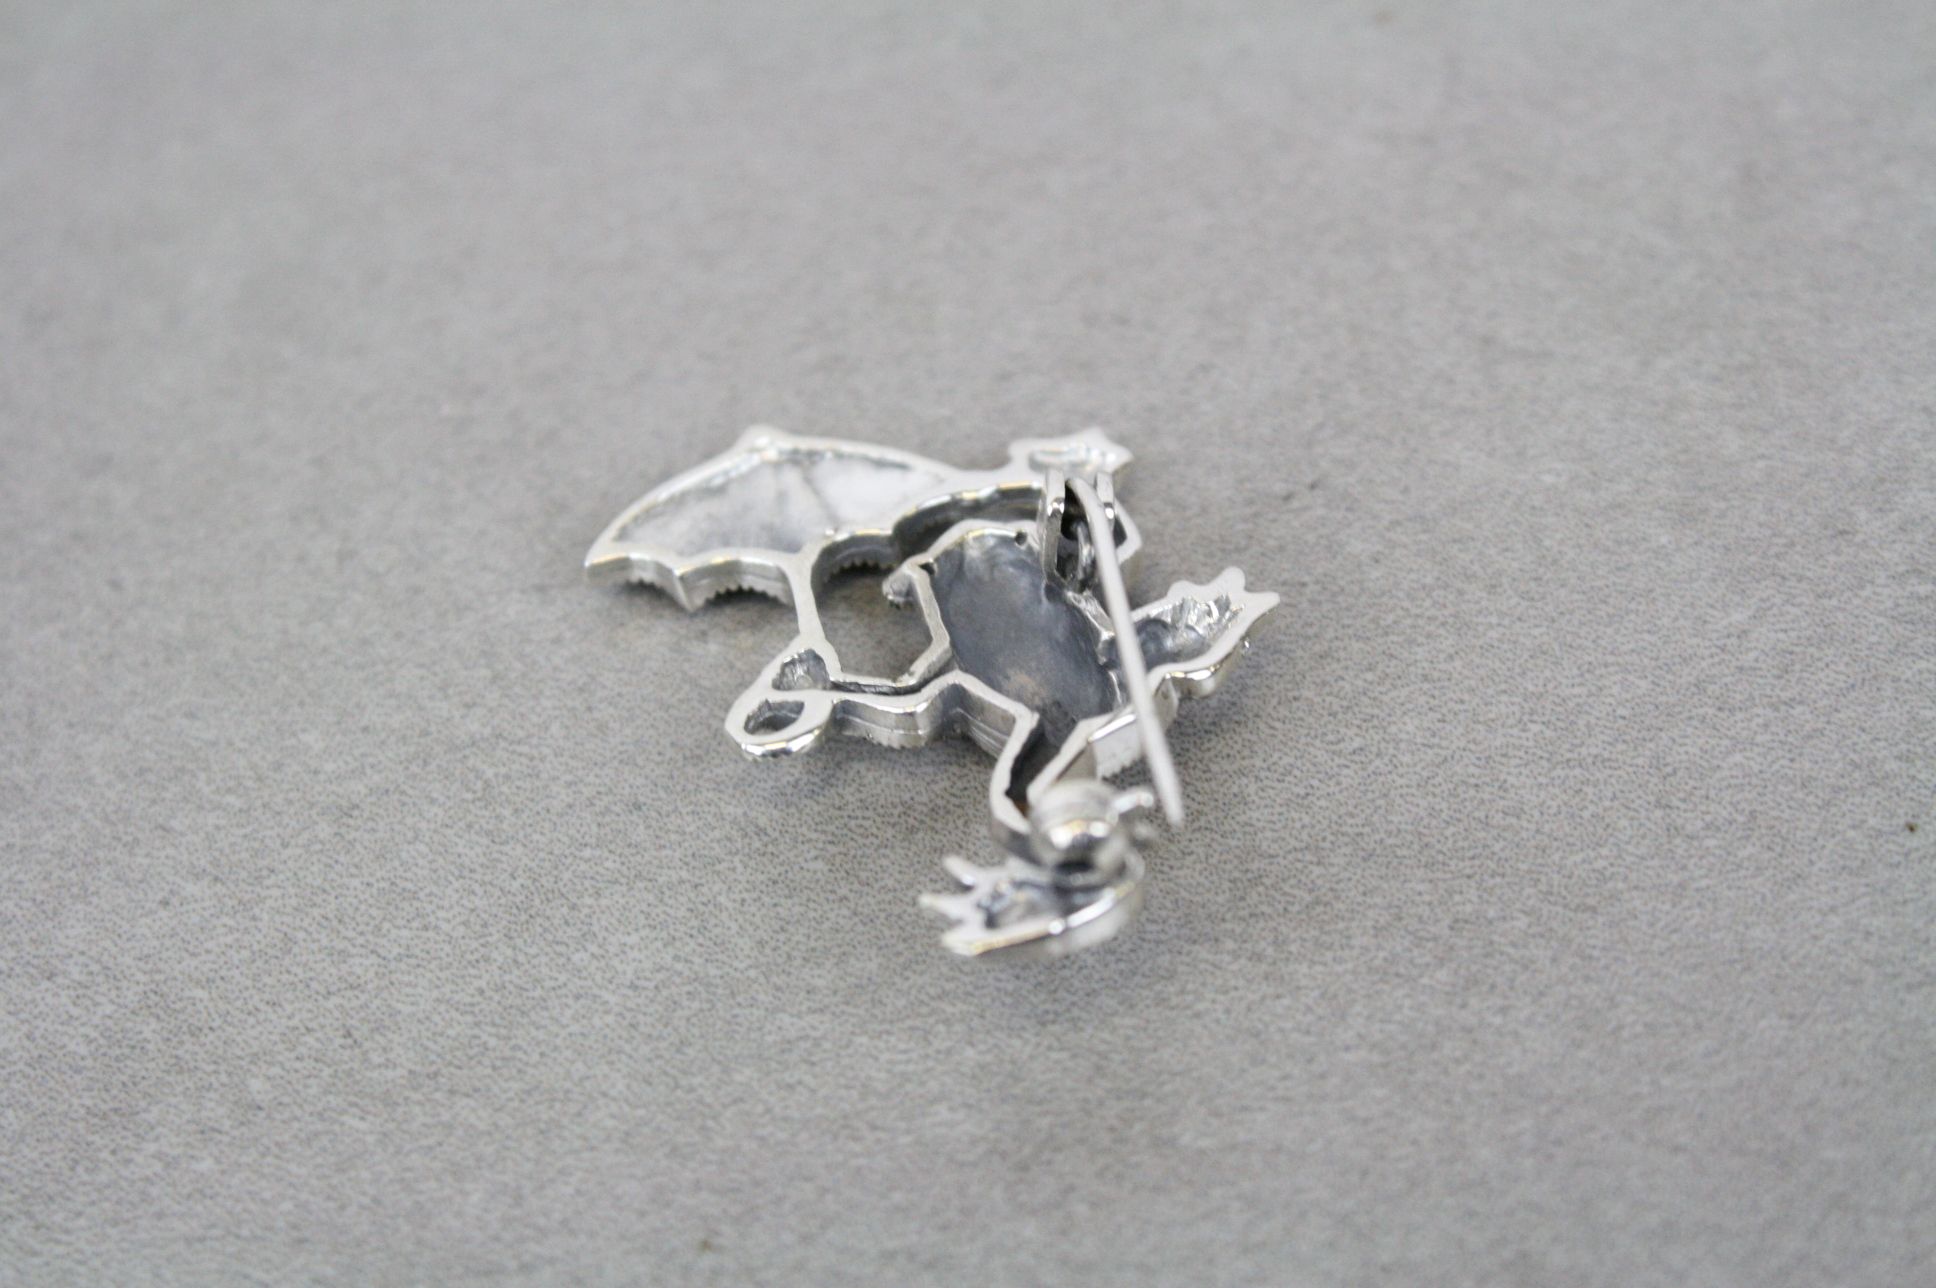 Silver and Marcasite lizard brooch with umbrella - Image 2 of 2